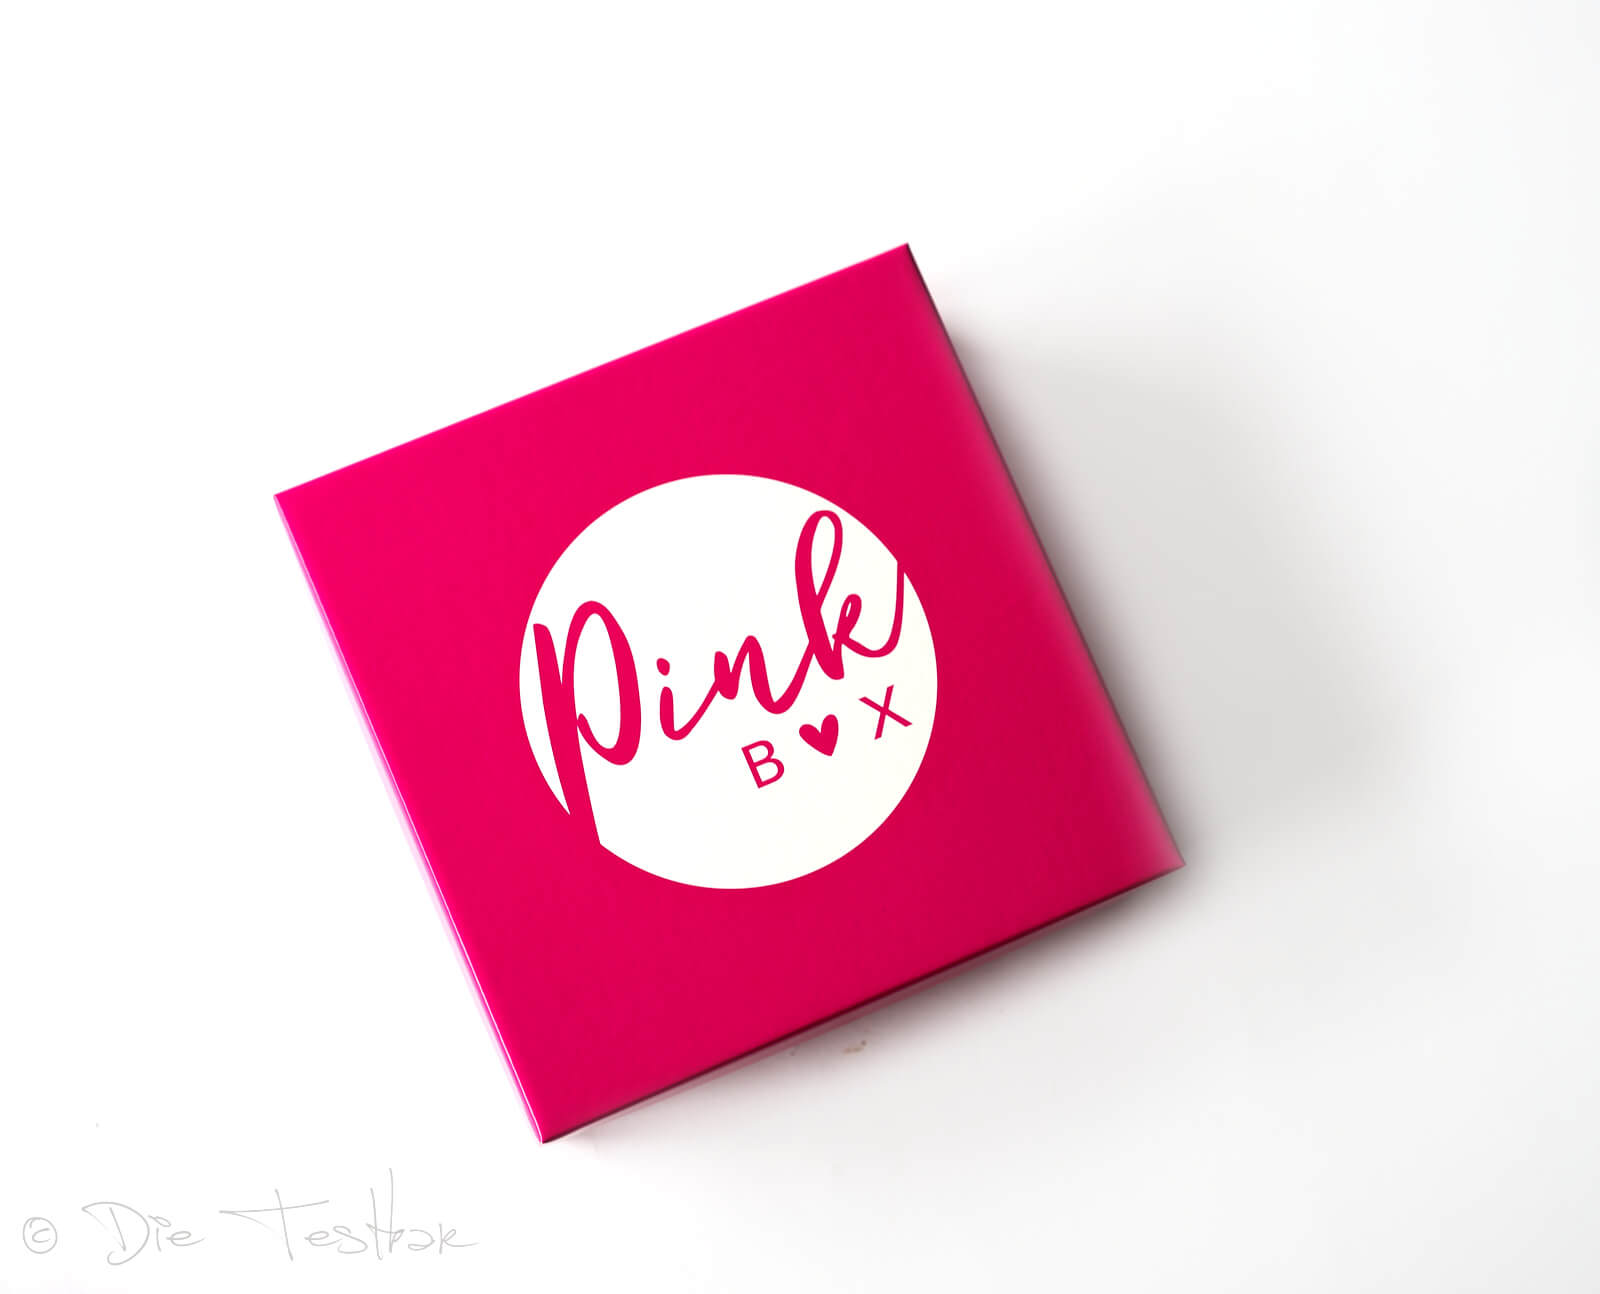 DIE PINK BOX im Mai 2021 – Pink Box Here Comes The Sun 2021